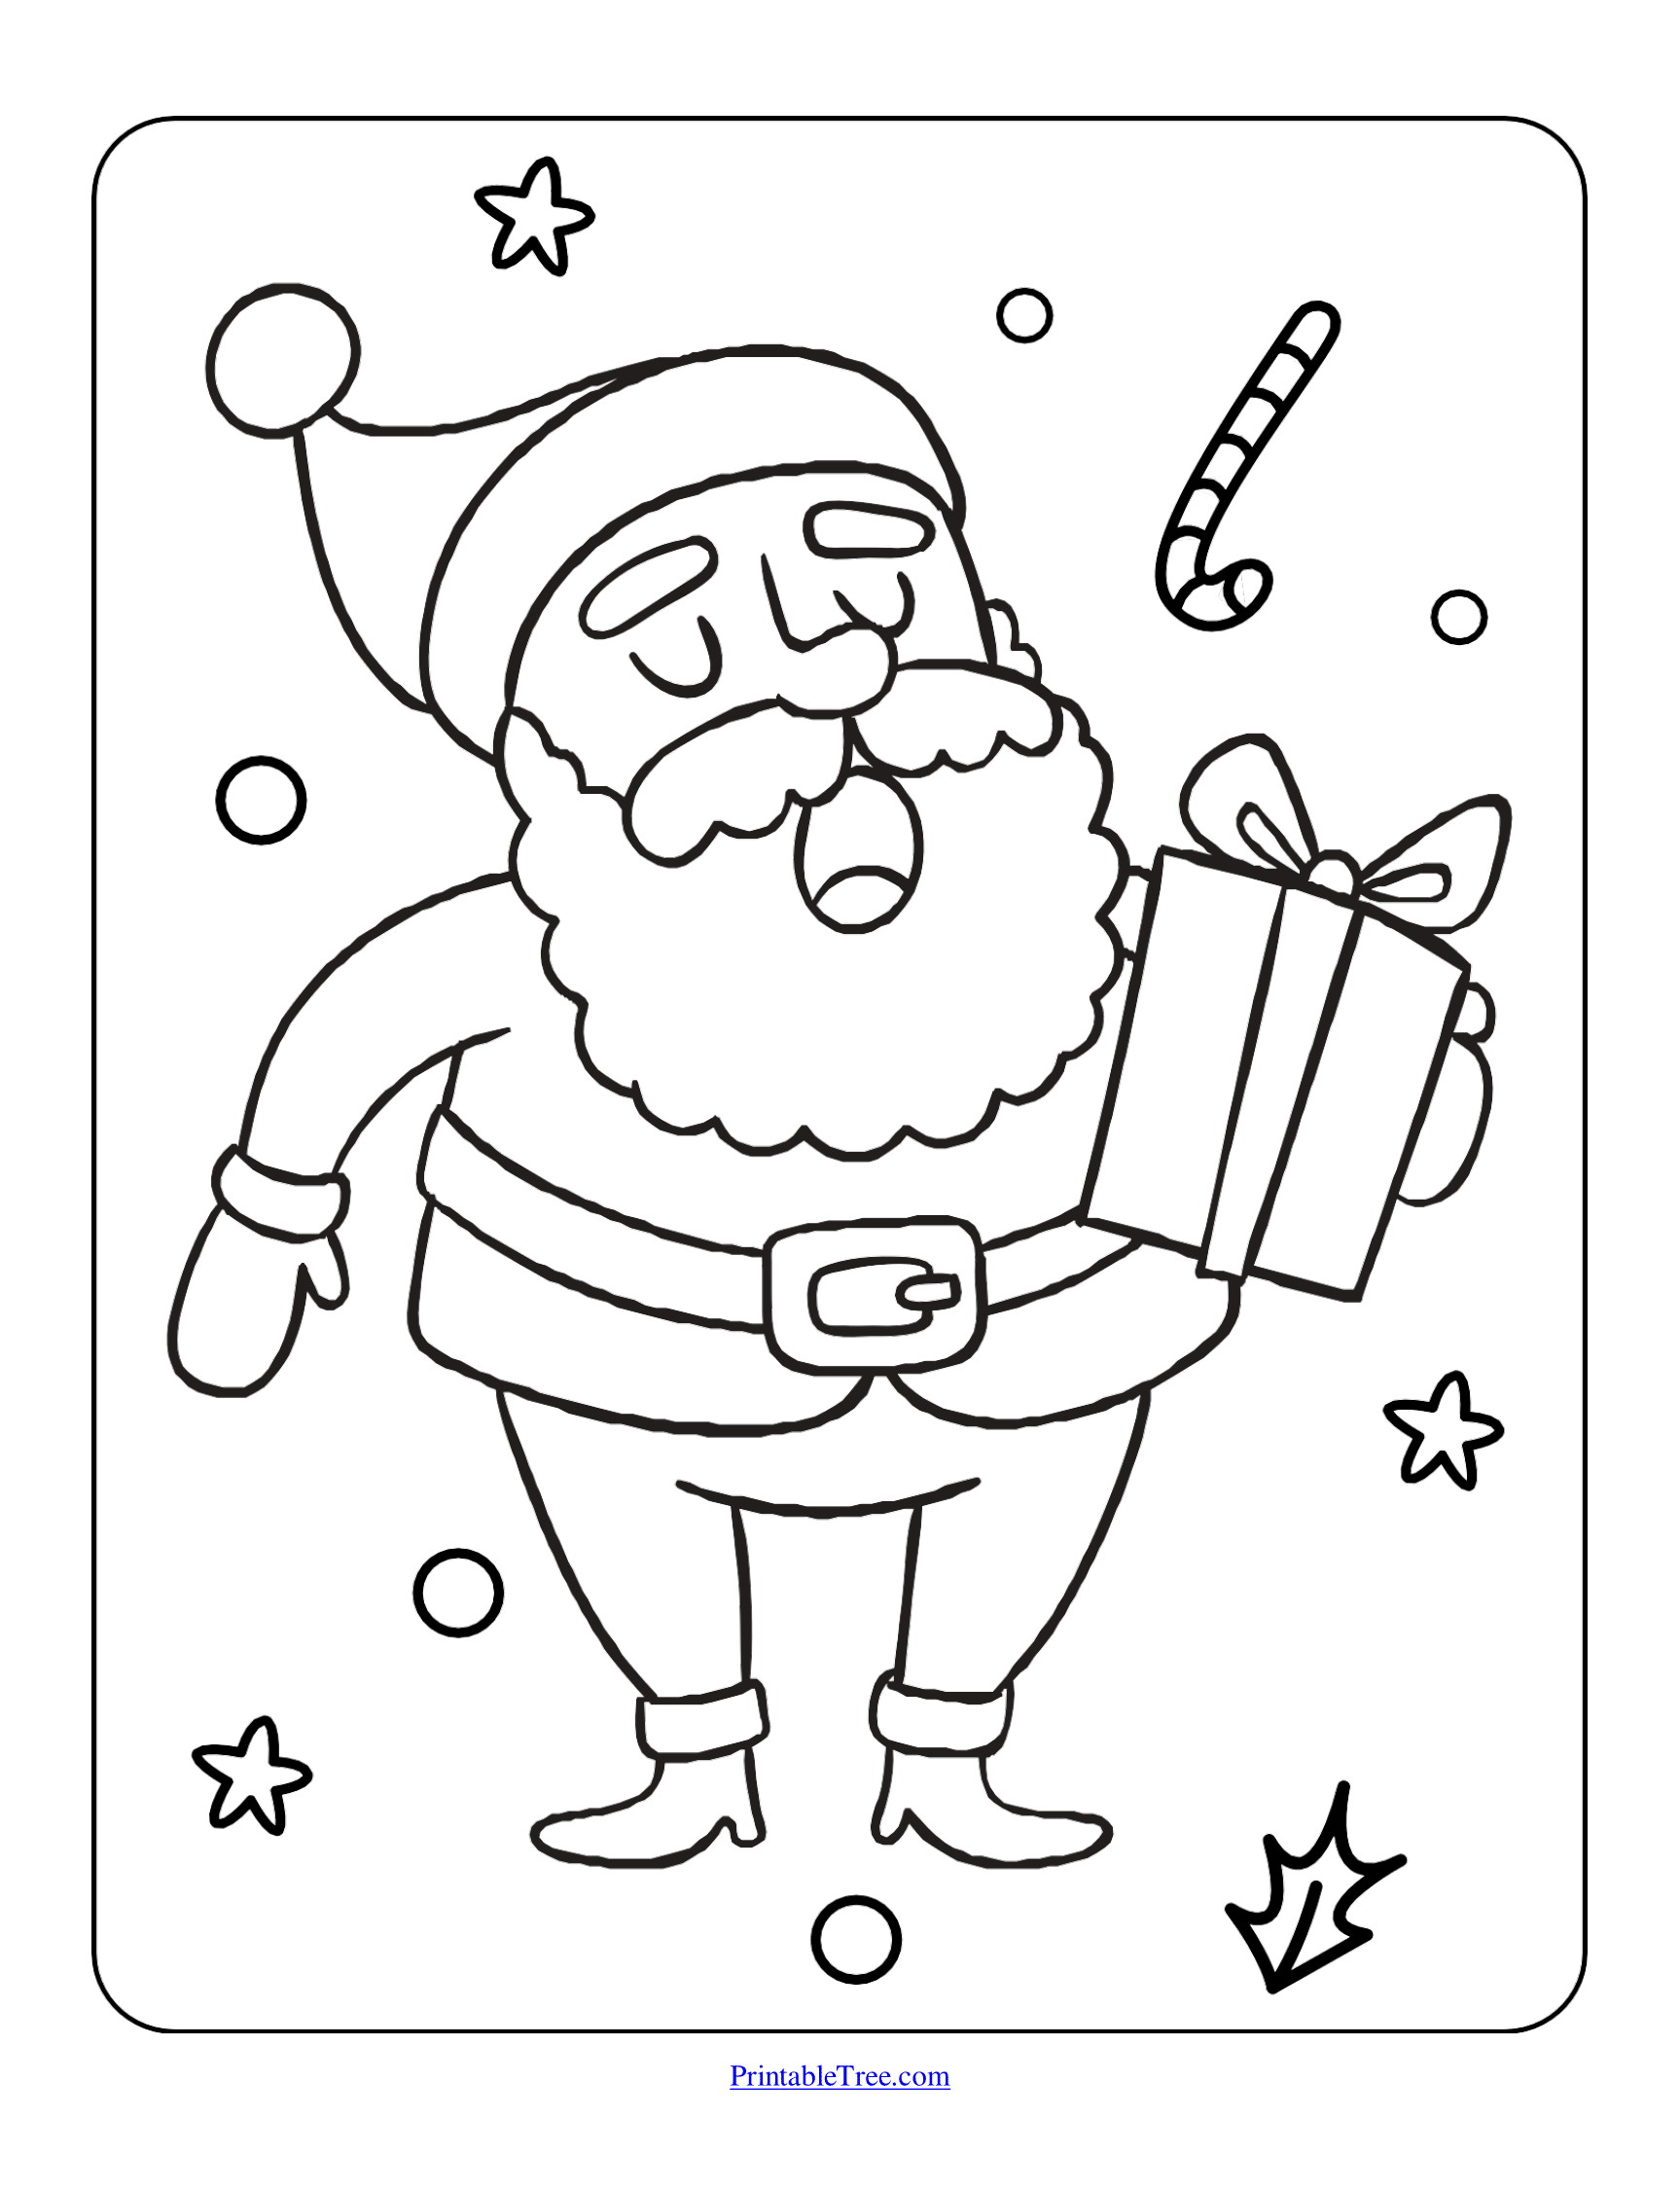 Free Printable Christmas Coloring Pages PDF for Kids and Adults